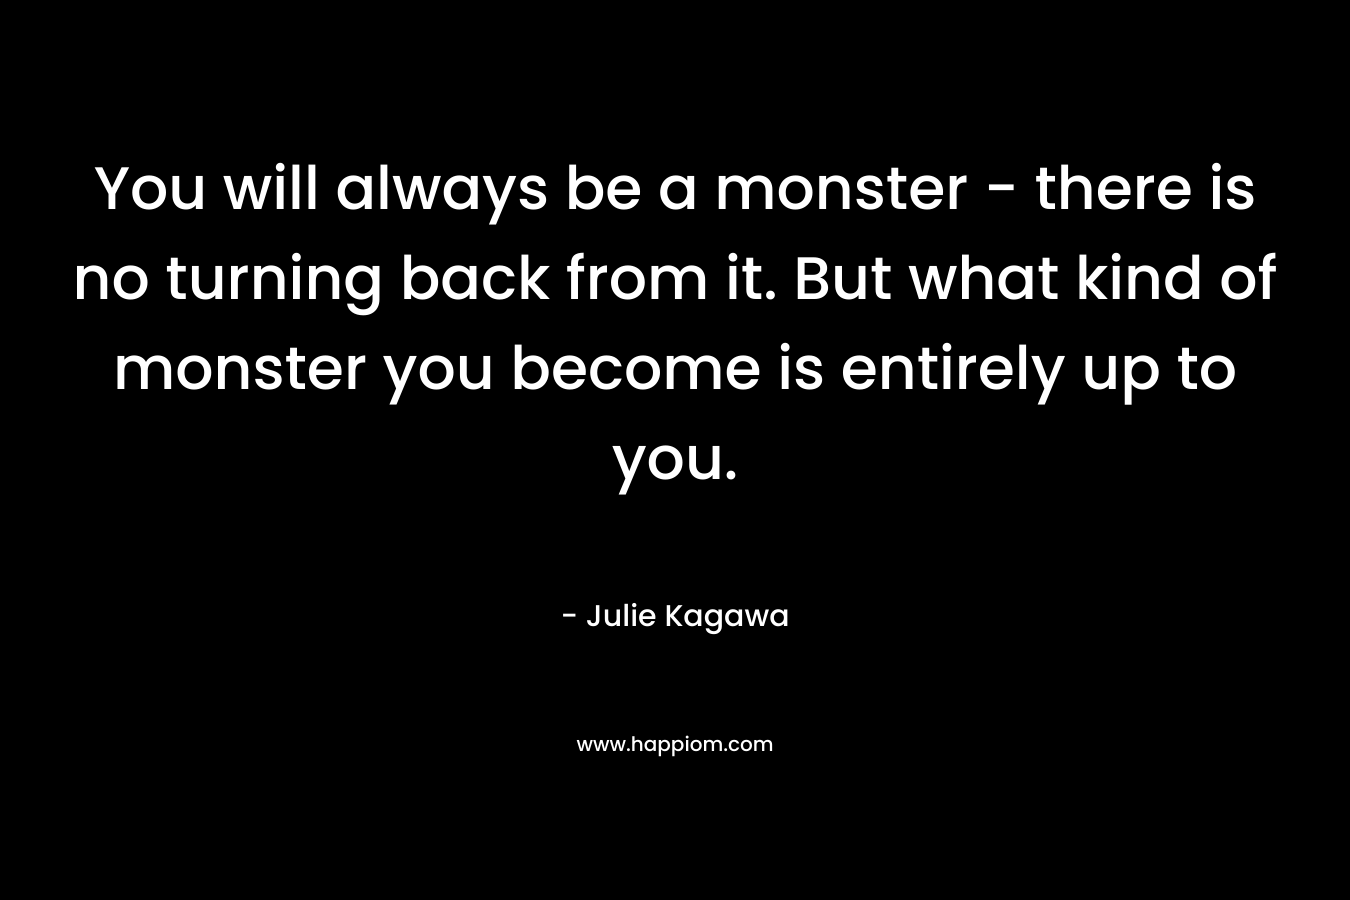 You will always be a monster - there is no turning back from it. But what kind of monster you become is entirely up to you.